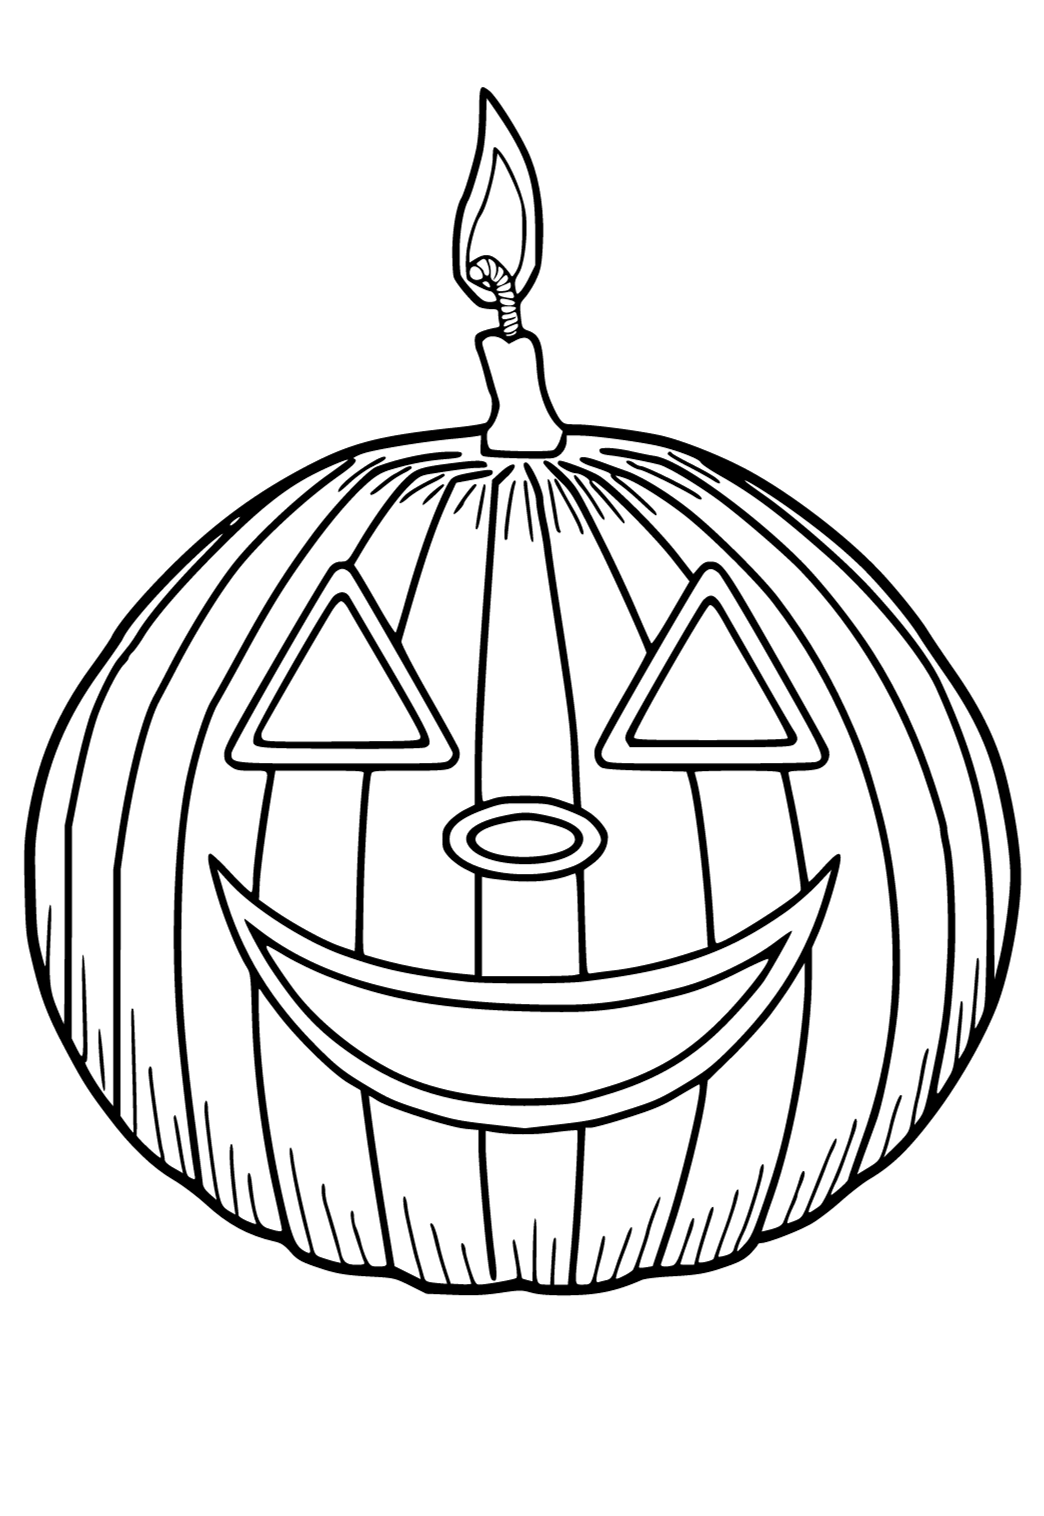 Free printable jack olantern blaze coloring page sheet and picture for adults and kids girls and boys